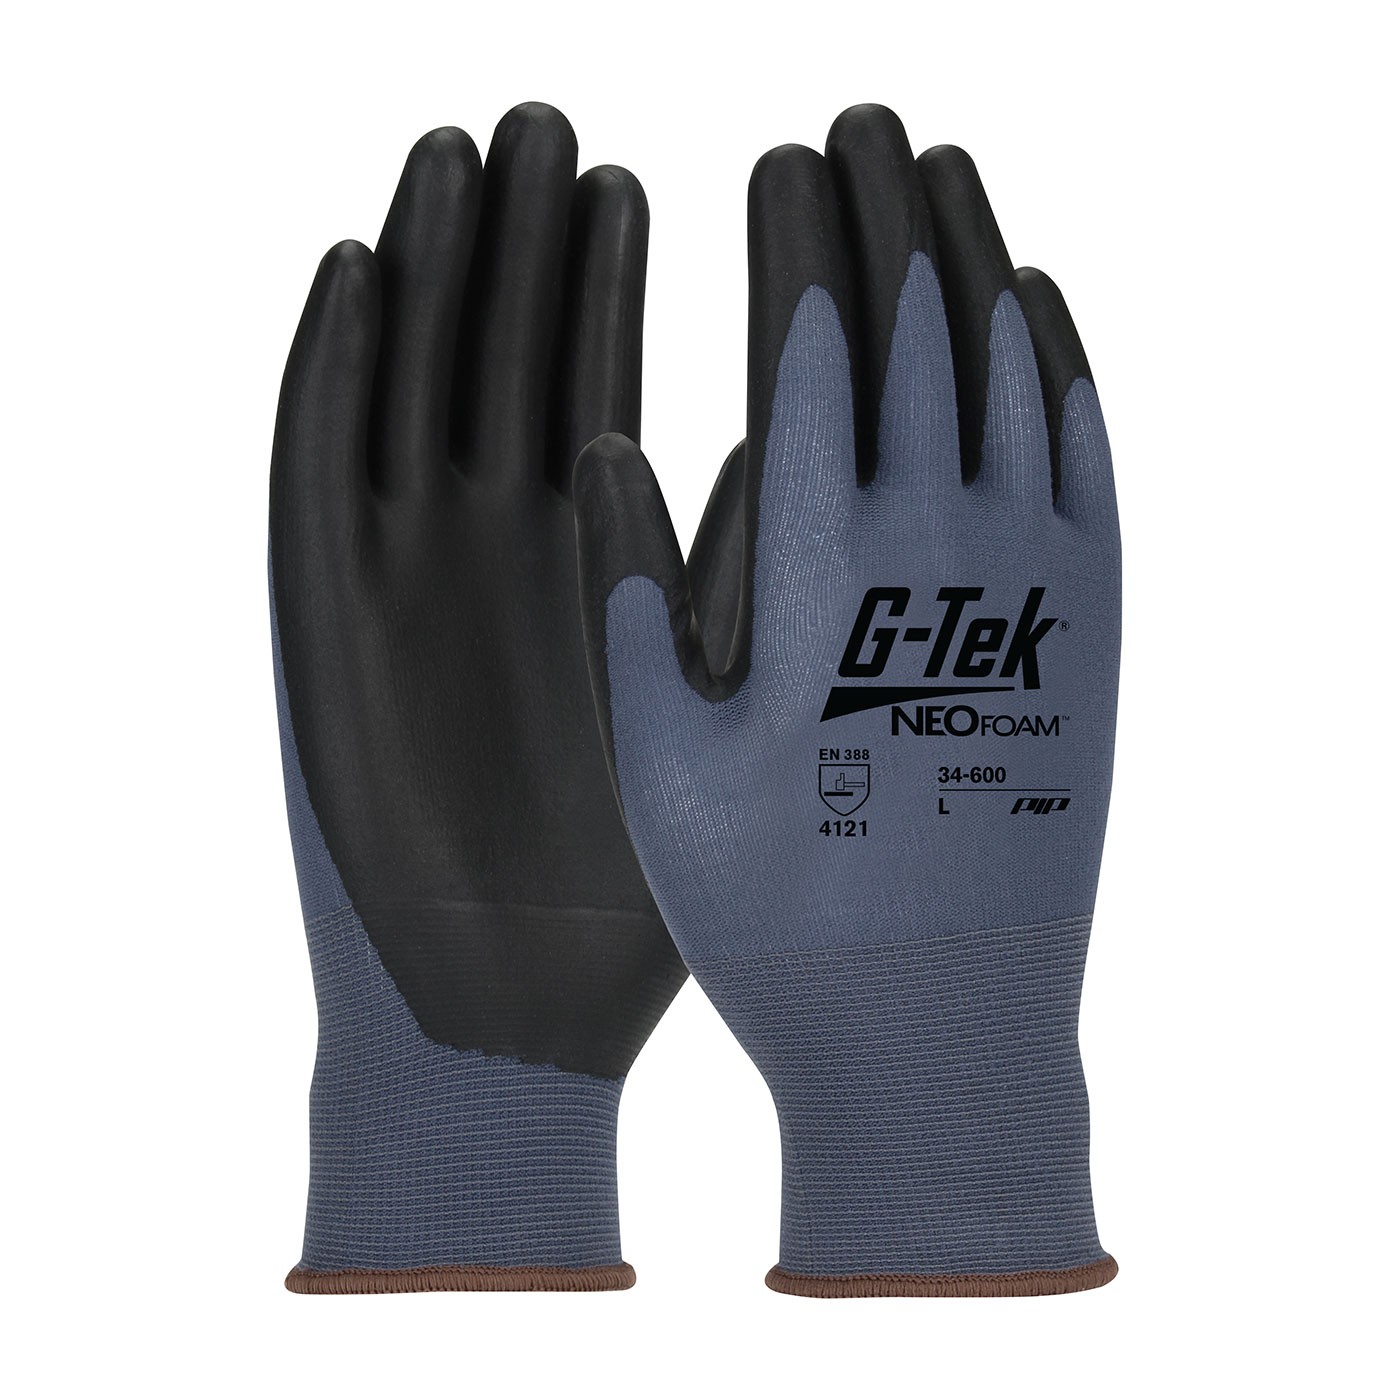 G-Tek® NeoFoam® Seamless Nylon Glove with NeoFoam® Coated Palm & Fingers - Touchscreen Compatible (#34-600)